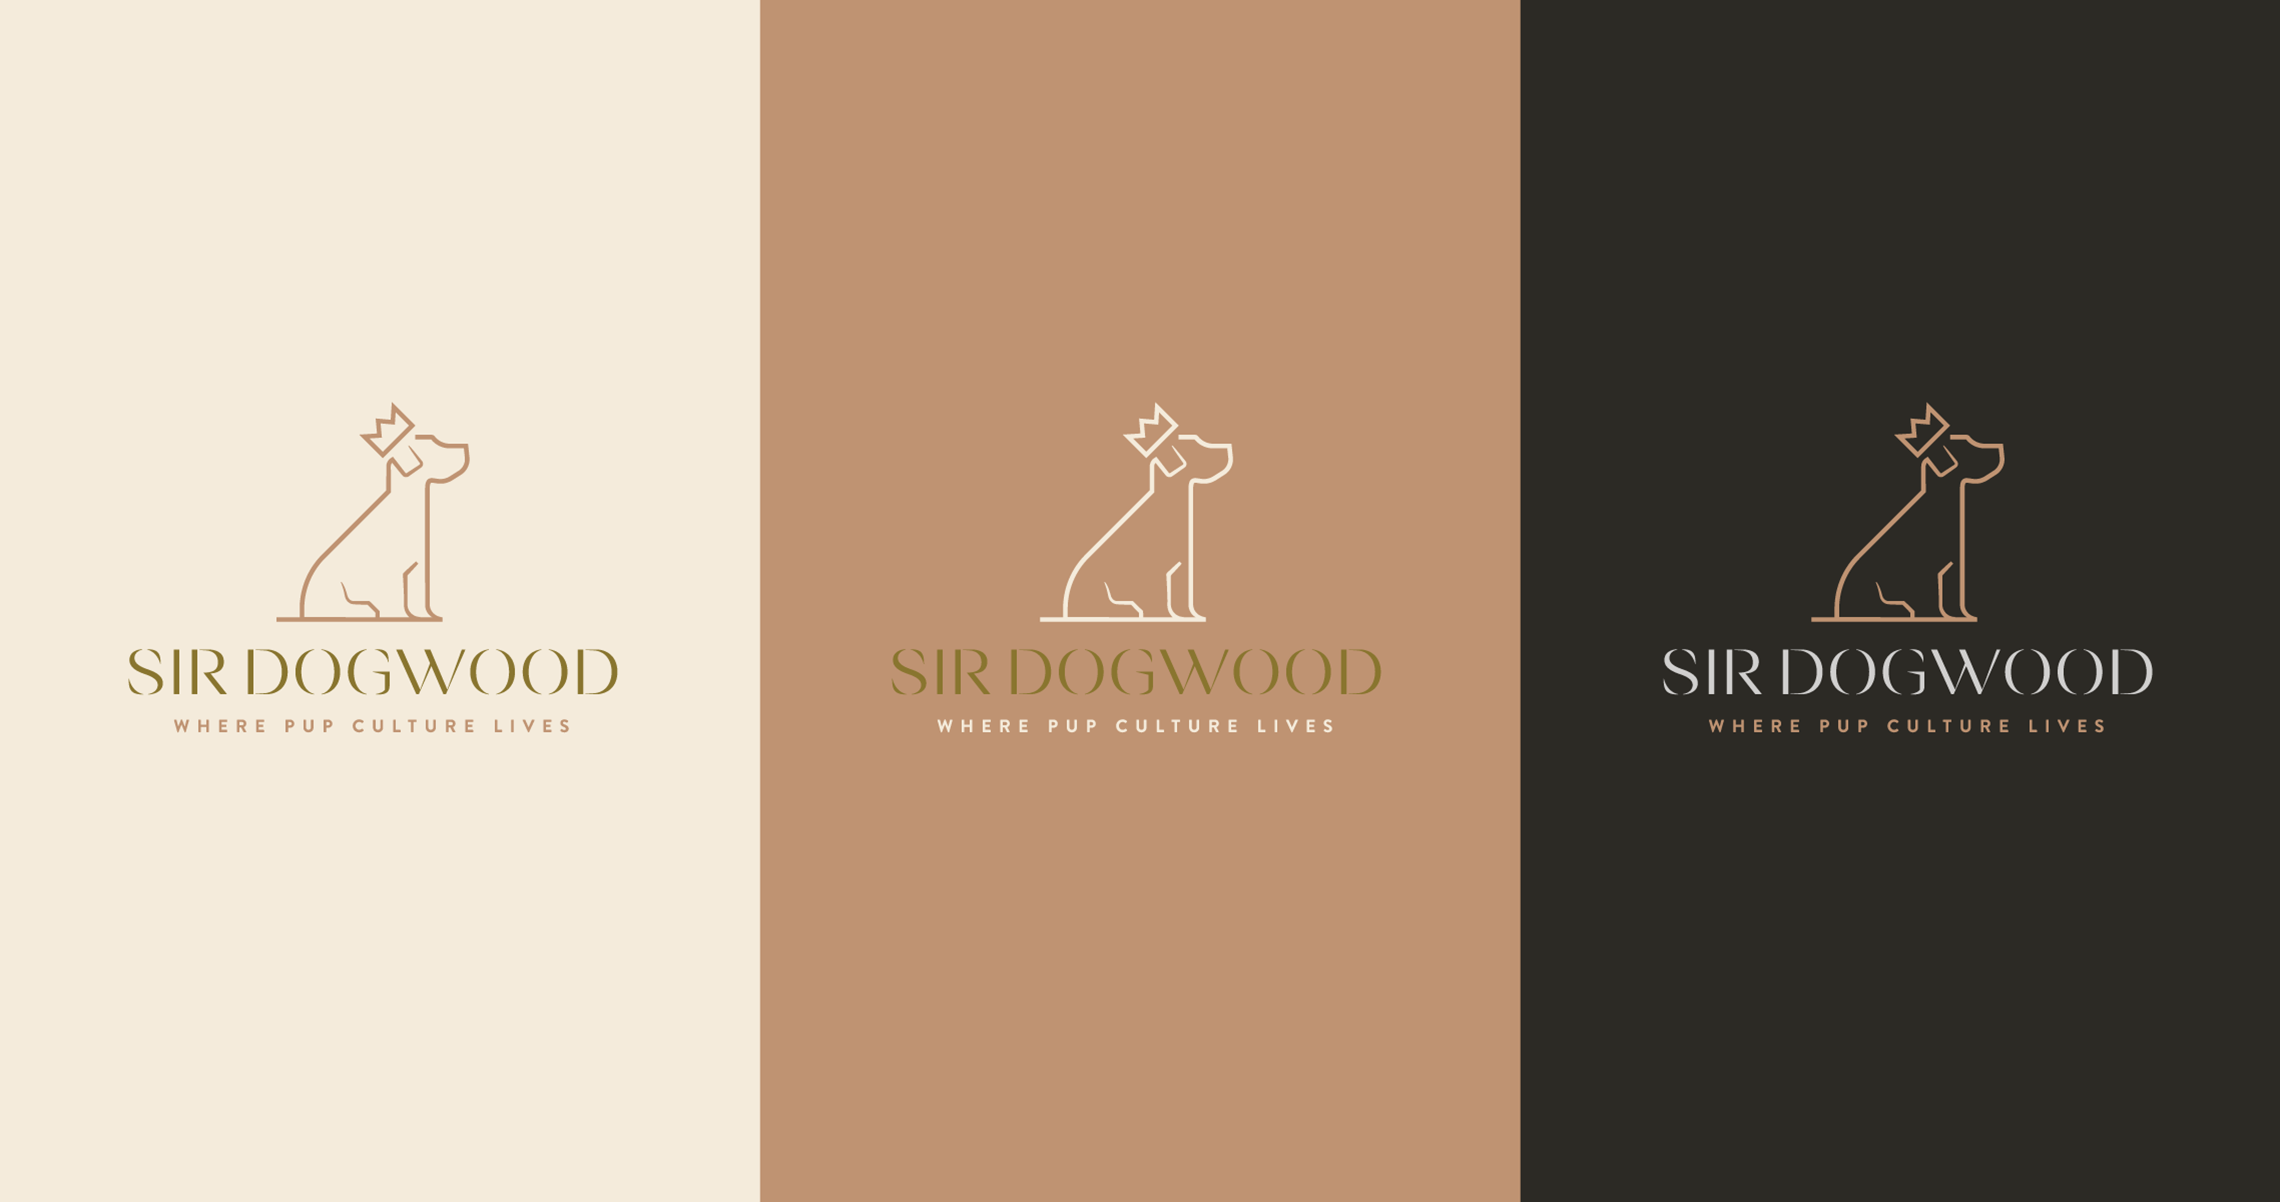 Multi-color logo designs for Sir Dogwood - taupe, gold, dark brown.